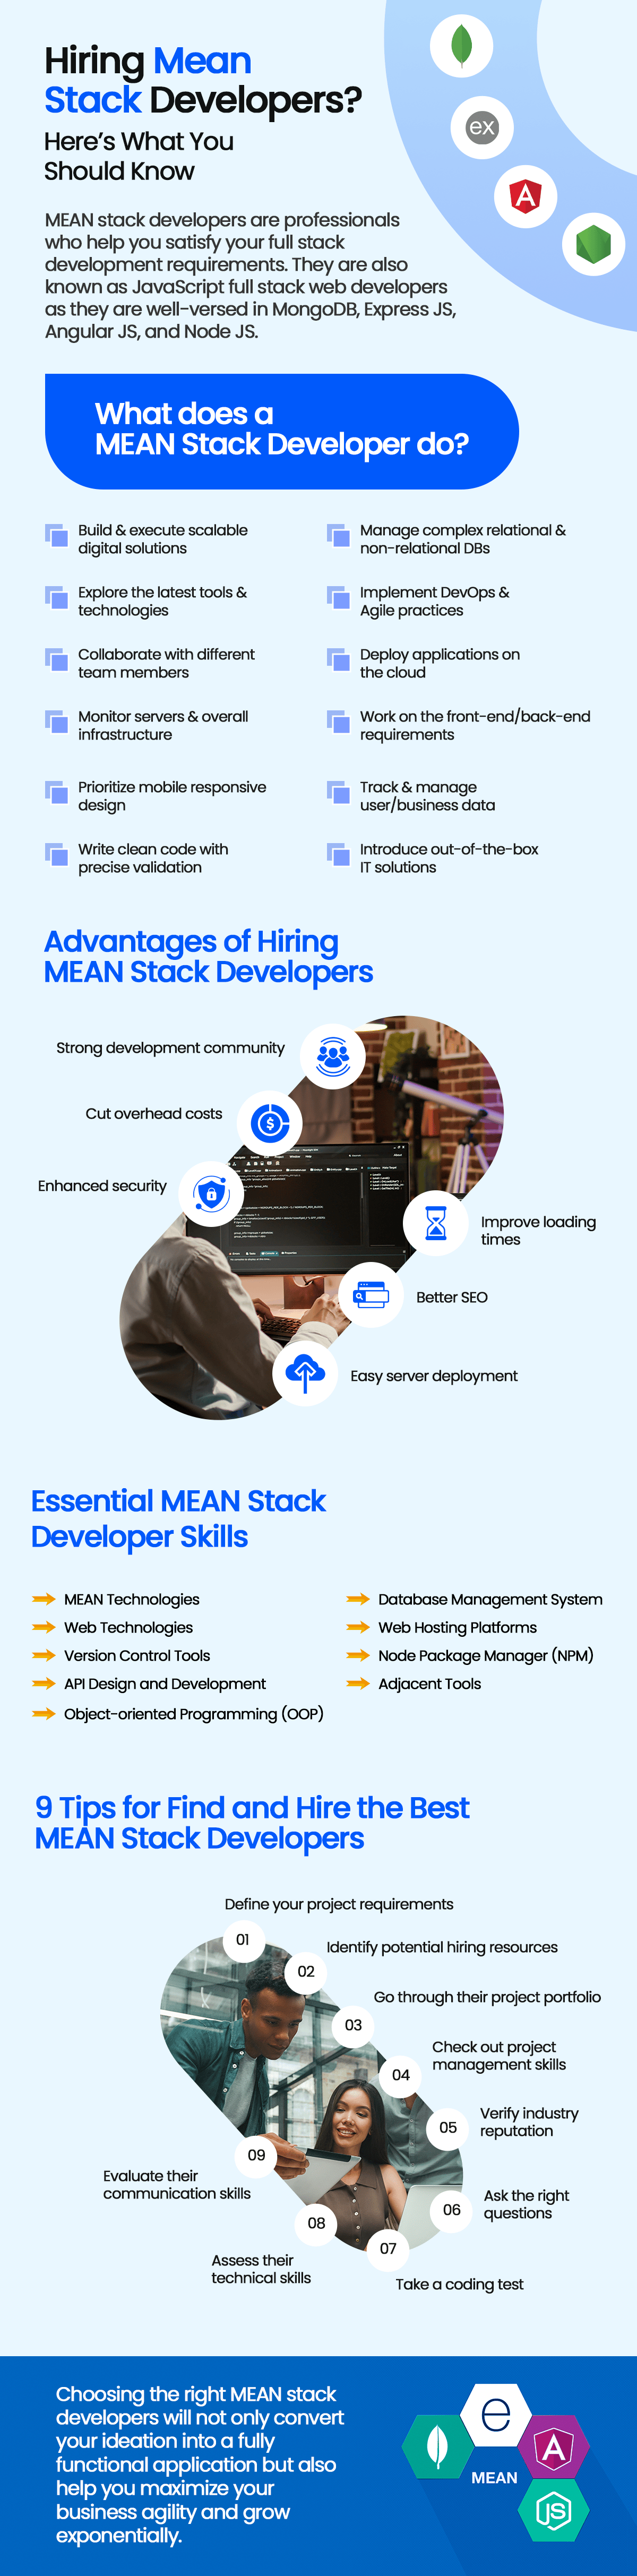 Hire Mean Stack developers infographic